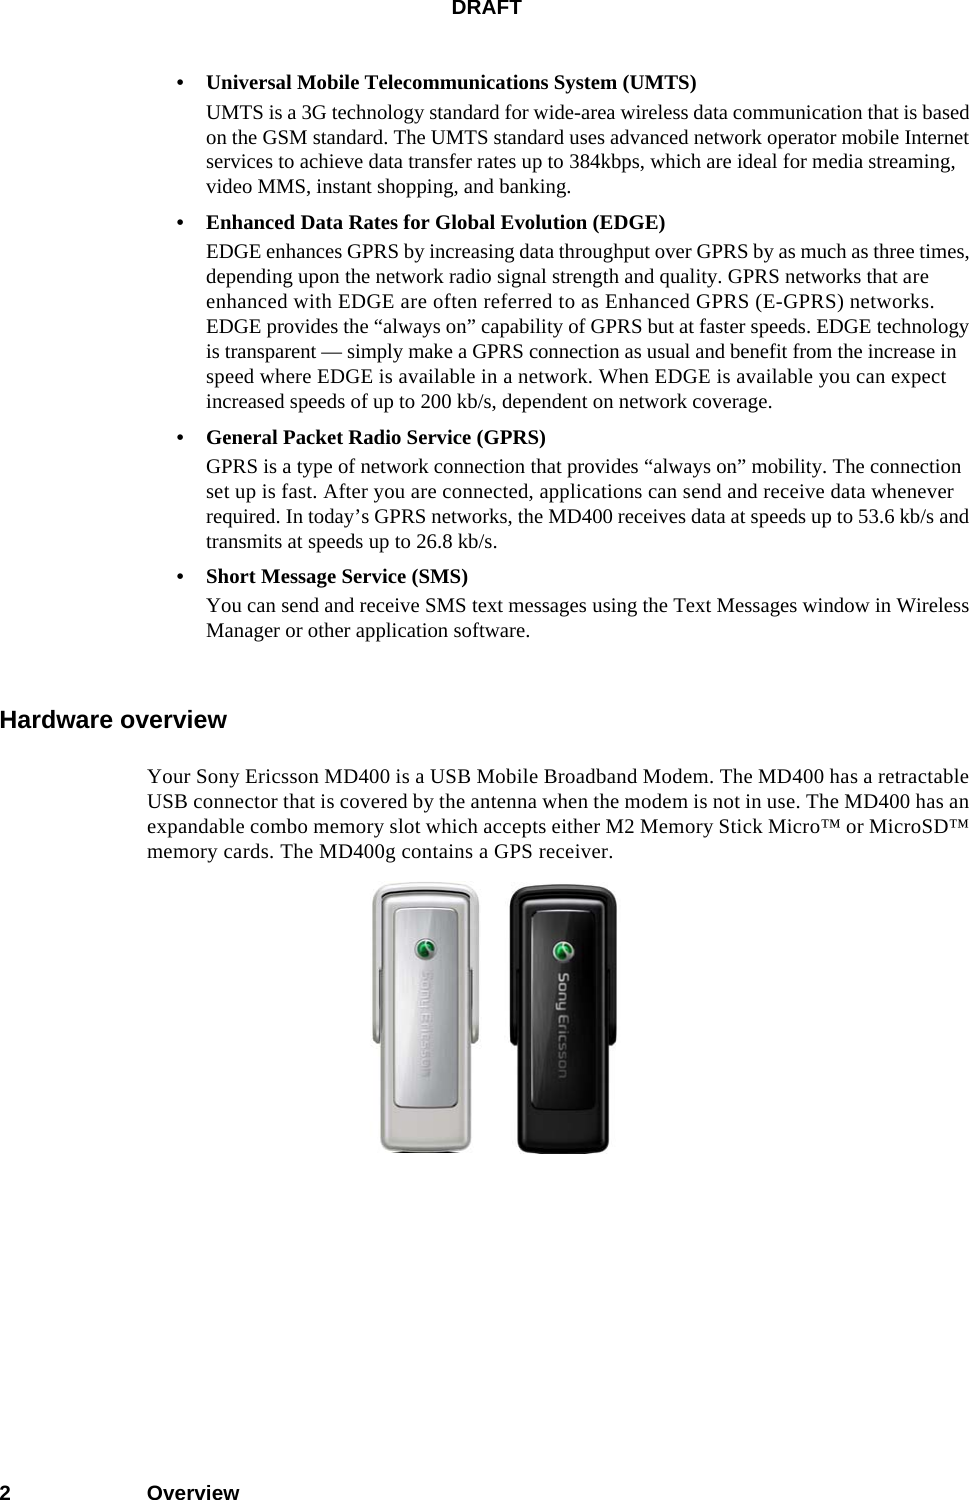 DRAFT2Overview• Universal Mobile Telecommunications System (UMTS)UMTS is a 3G technology standard for wide-area wireless data communication that is based on the GSM standard. The UMTS standard uses advanced network operator mobile Internet services to achieve data transfer rates up to 384kbps, which are ideal for media streaming, video MMS, instant shopping, and banking.• Enhanced Data Rates for Global Evolution (EDGE)EDGE enhances GPRS by increasing data throughput over GPRS by as much as three times, depending upon the network radio signal strength and quality. GPRS networks that are enhanced with EDGE are often referred to as Enhanced GPRS (E-GPRS) networks. EDGE provides the “always on” capability of GPRS but at faster speeds. EDGE technology is transparent — simply make a GPRS connection as usual and benefit from the increase in speed where EDGE is available in a network. When EDGE is available you can expect increased speeds of up to 200 kb/s, dependent on network coverage.• General Packet Radio Service (GPRS)GPRS is a type of network connection that provides “always on” mobility. The connection set up is fast. After you are connected, applications can send and receive data whenever required. In today’s GPRS networks, the MD400 receives data at speeds up to 53.6 kb/s and transmits at speeds up to 26.8 kb/s.• Short Message Service (SMS)You can send and receive SMS text messages using the Text Messages window in Wireless Manager or other application software.Hardware overviewYour Sony Ericsson MD400 is a USB Mobile Broadband Modem. The MD400 has a retractable USB connector that is covered by the antenna when the modem is not in use. The MD400 has an expandable combo memory slot which accepts either M2 Memory Stick Micro™ or MicroSD™ memory cards. The MD400g contains a GPS receiver.